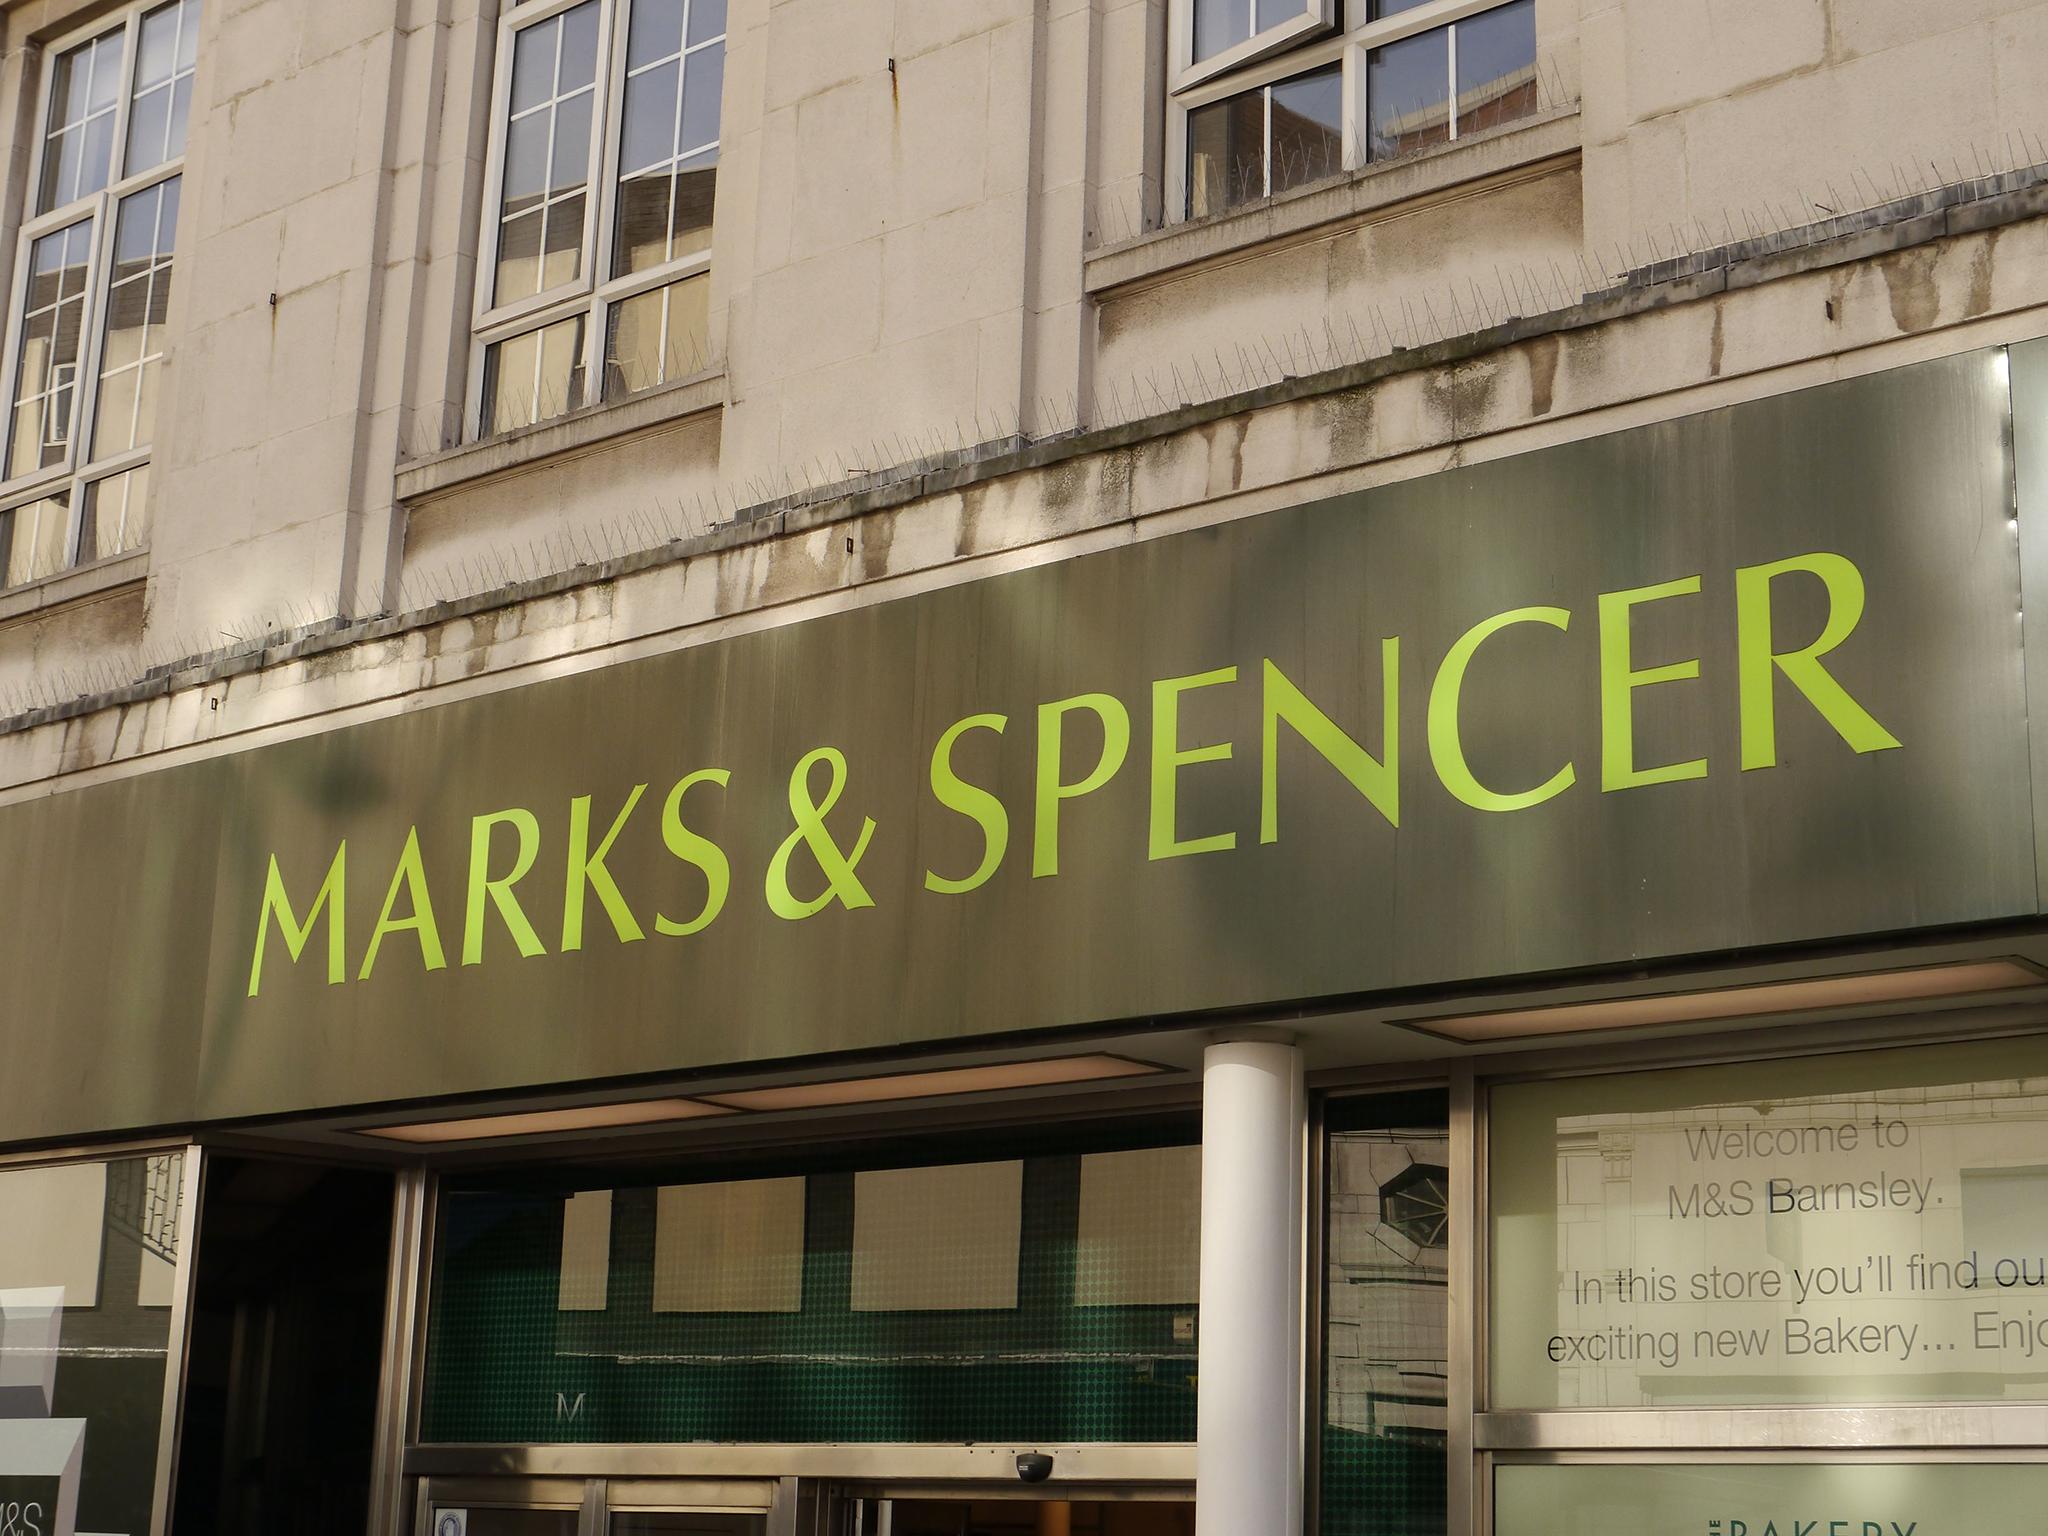 An M&S spokesperson confirmed there had been a "tragic customer accident" at the store